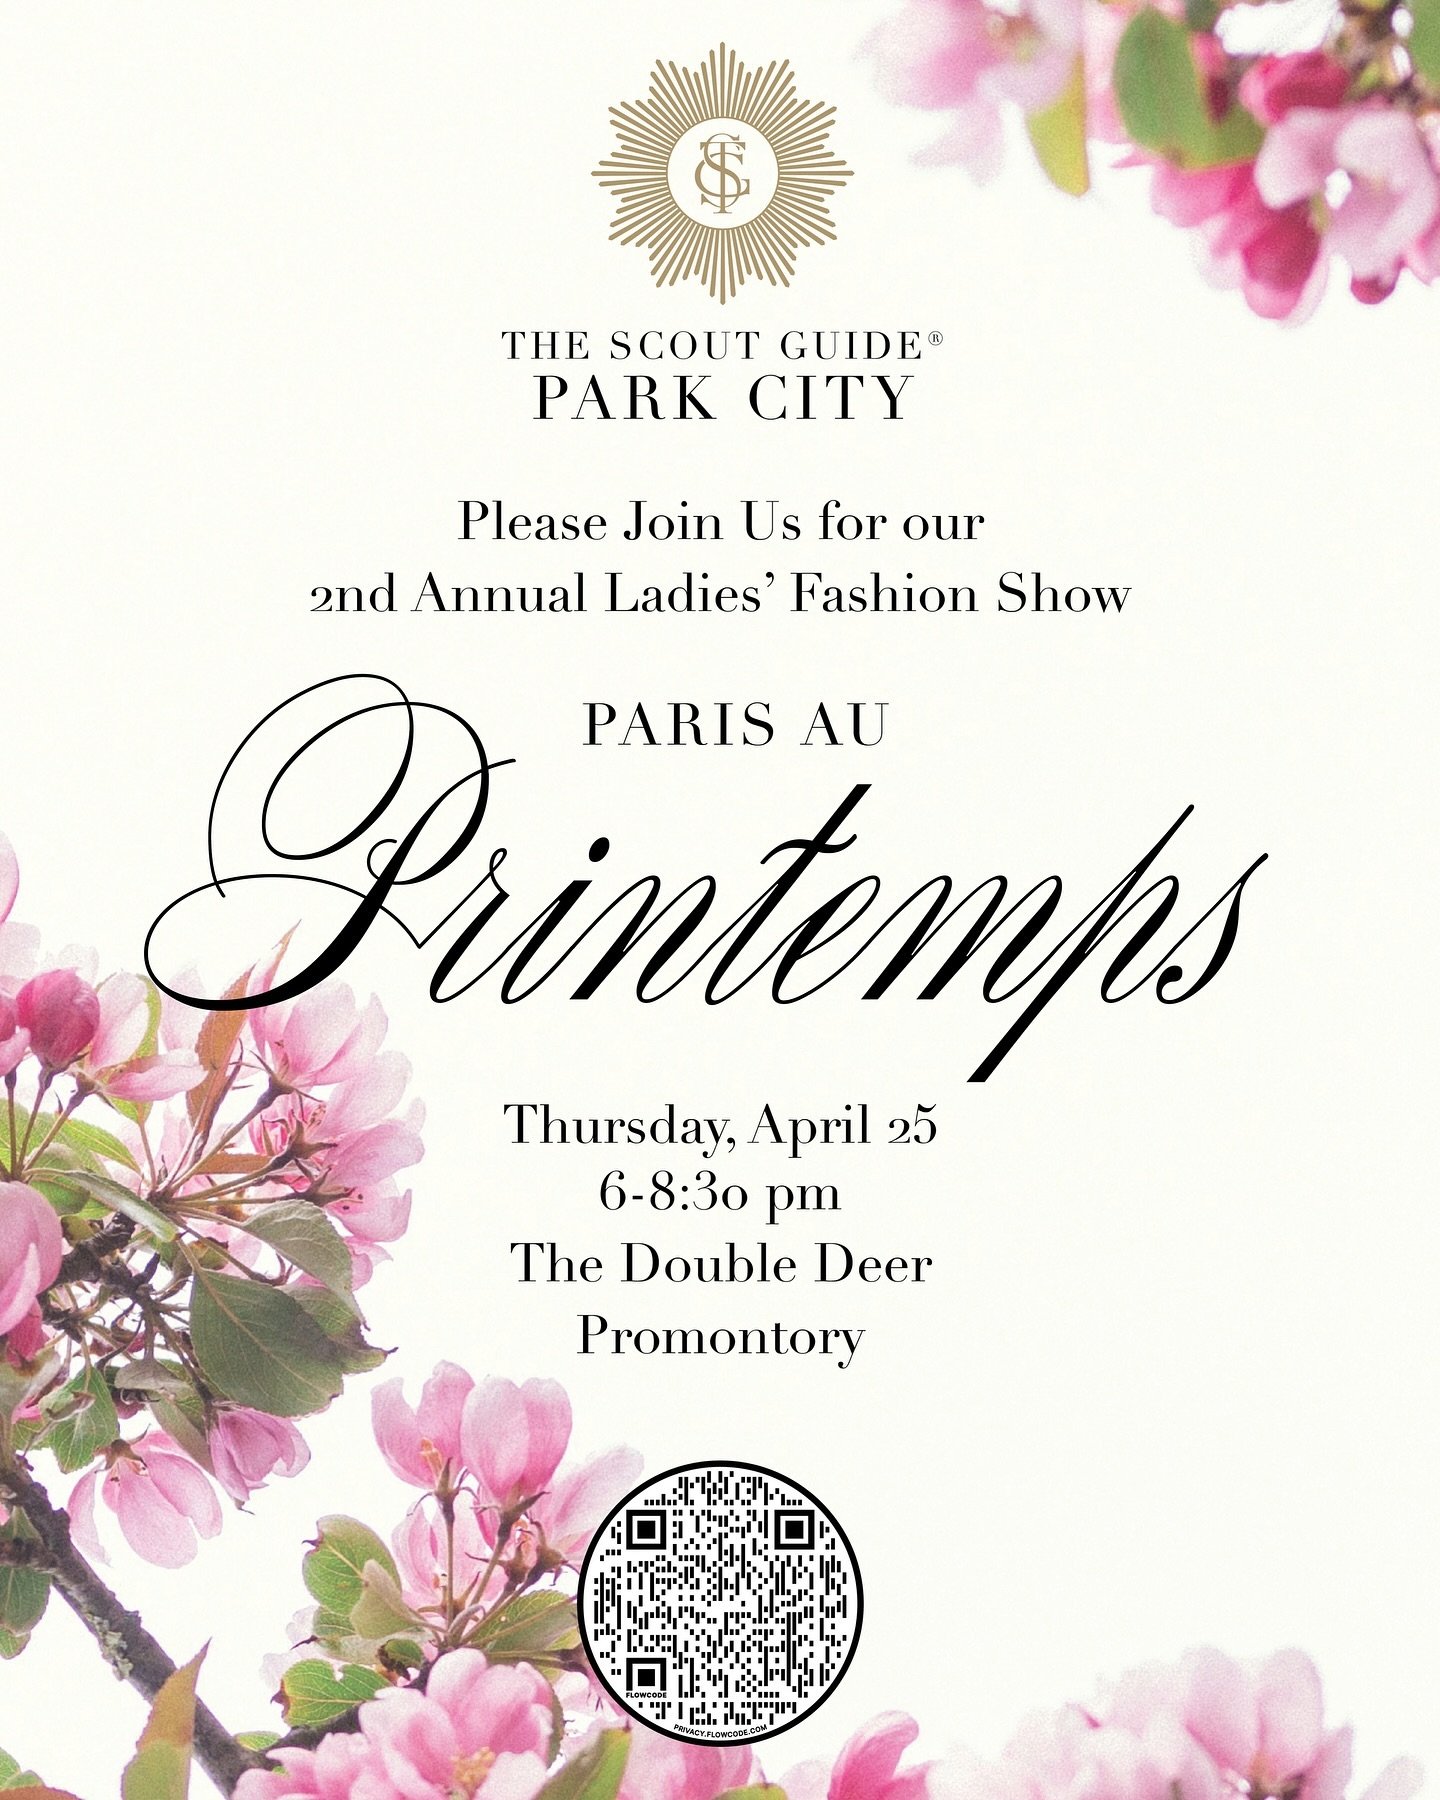 JOIN US tomorrow! ✨ 🇫🇷 🌸

You&rsquo;re invited to the 2nd annual @tsgparkcity &ldquo;Paris Au Printemps&rdquo; Fashion Show! An evening featuring Parisian inspired looks from Zenzee and other Scouted Park City boutiques, goodie bags, shopping, and